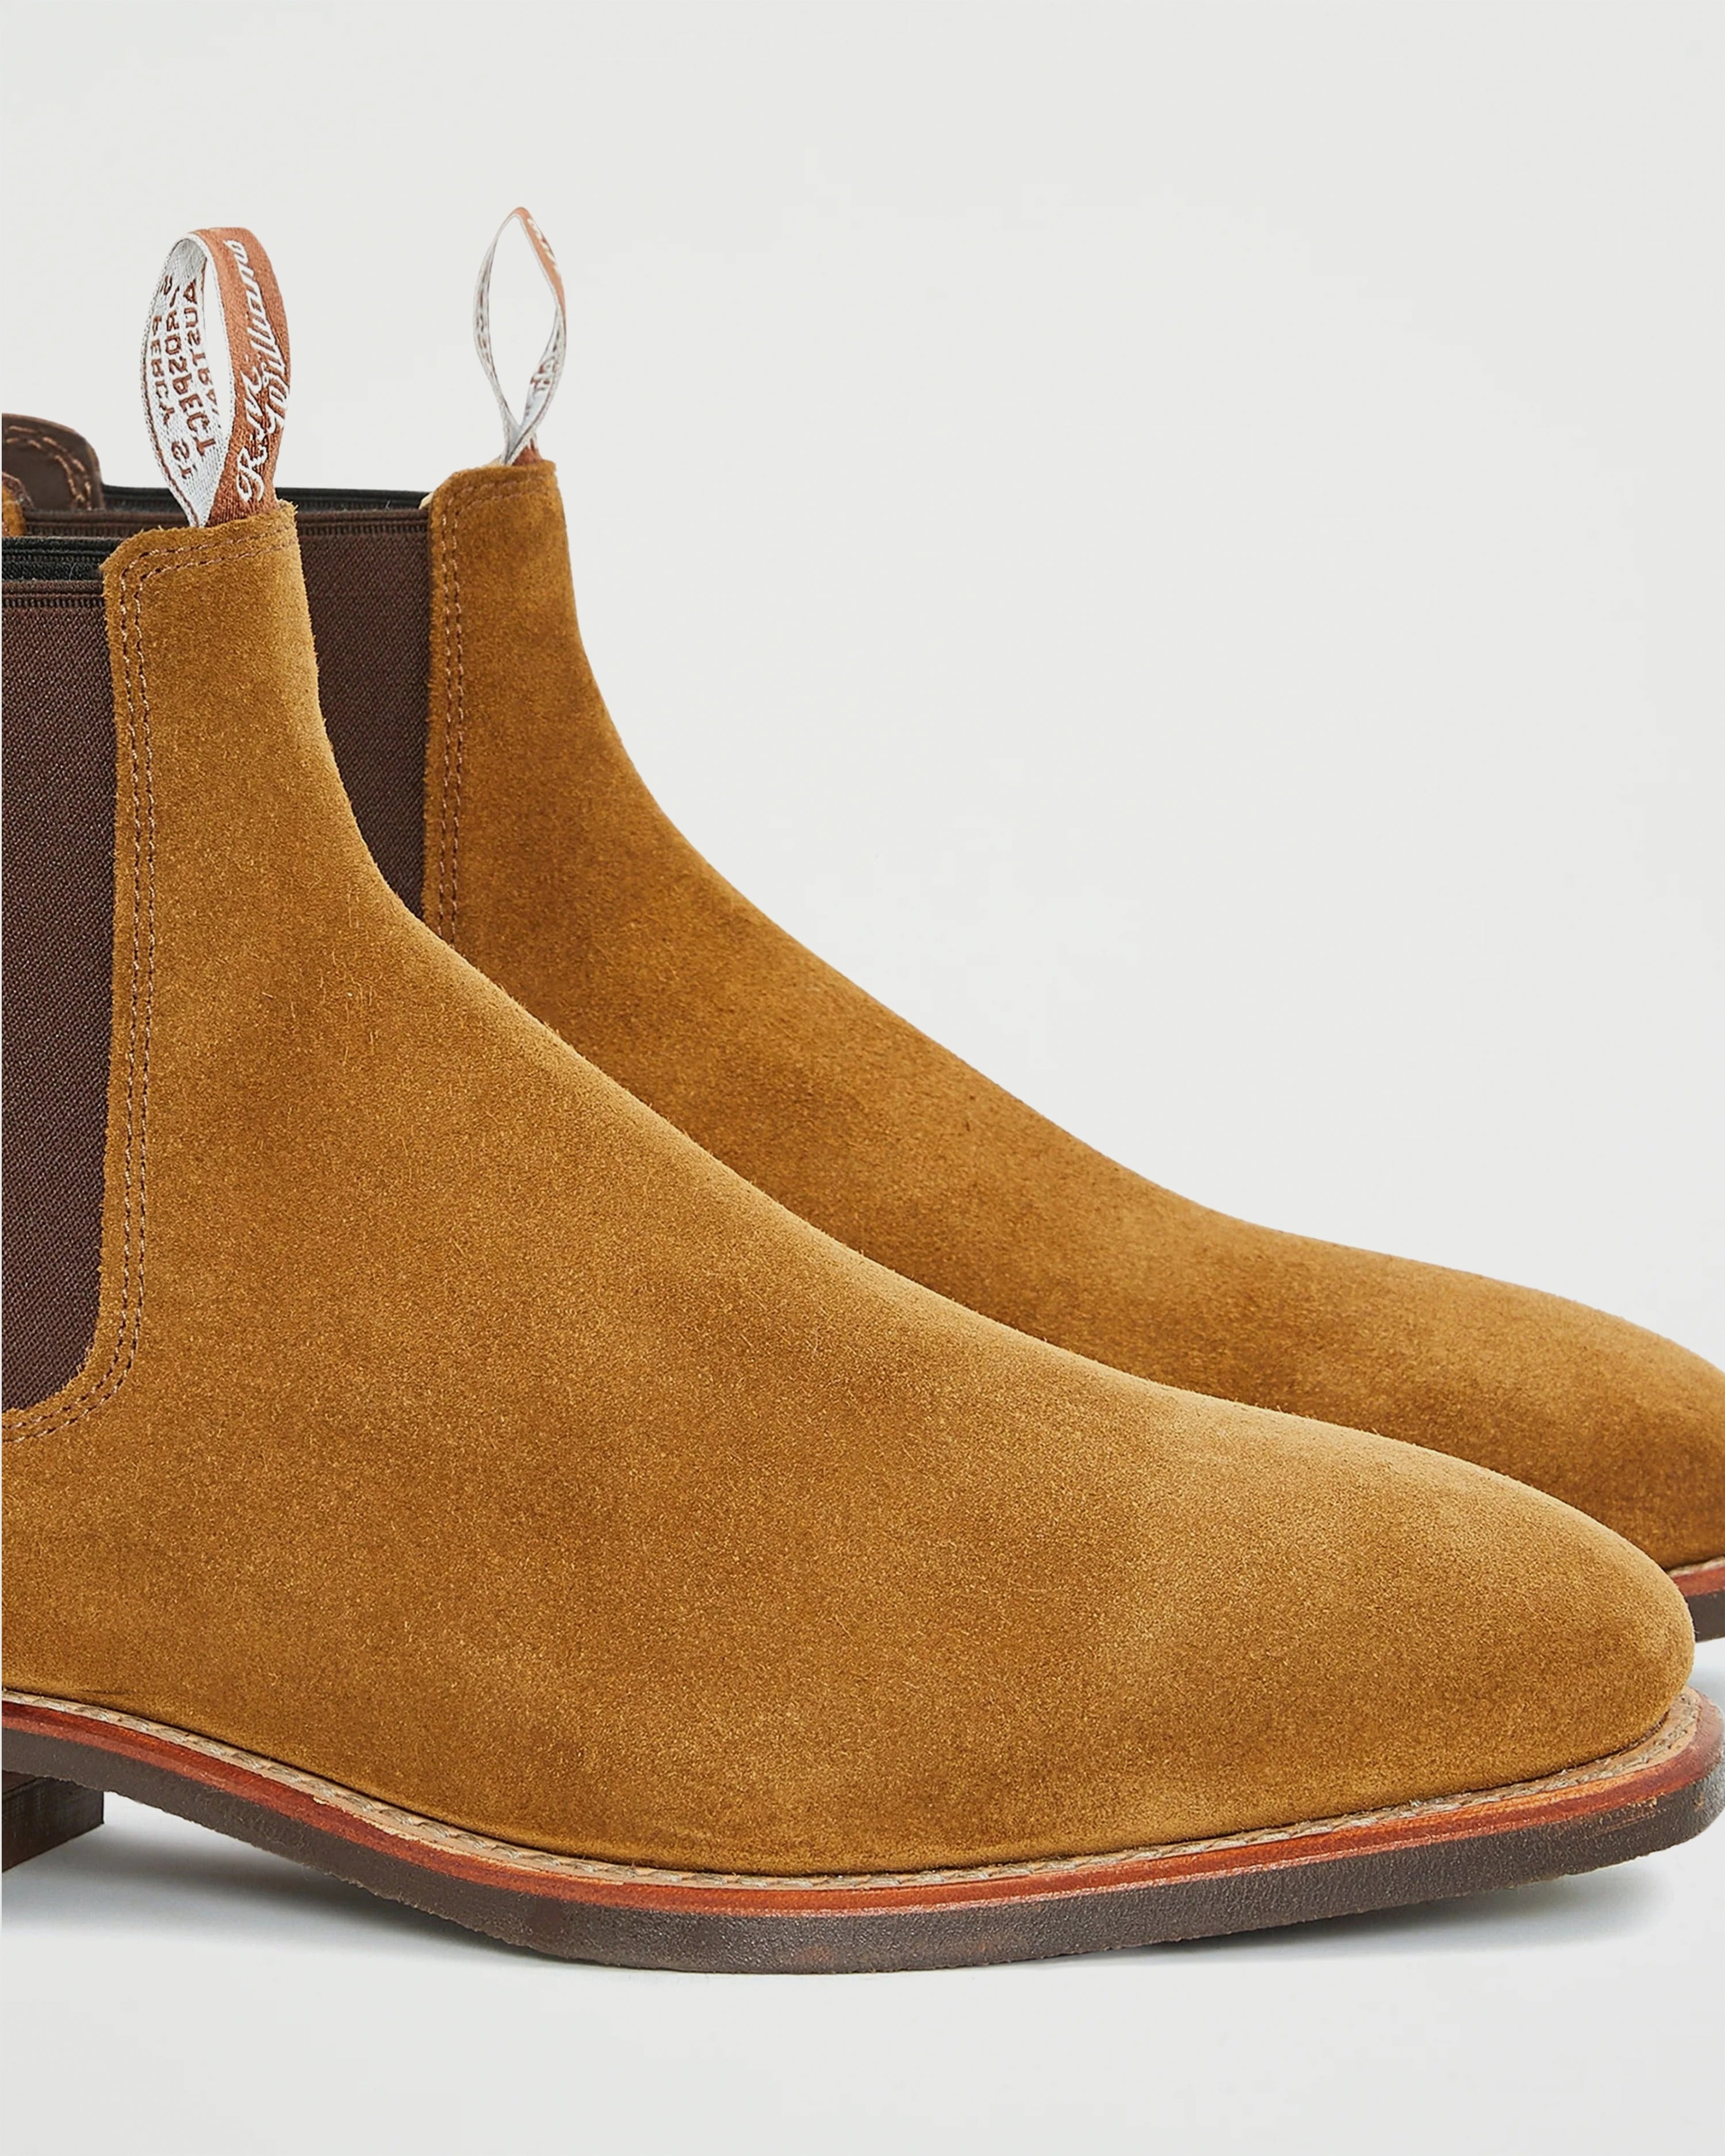 R.M.WILLIAMS Craftsman Leather Chelsea Boots for Men